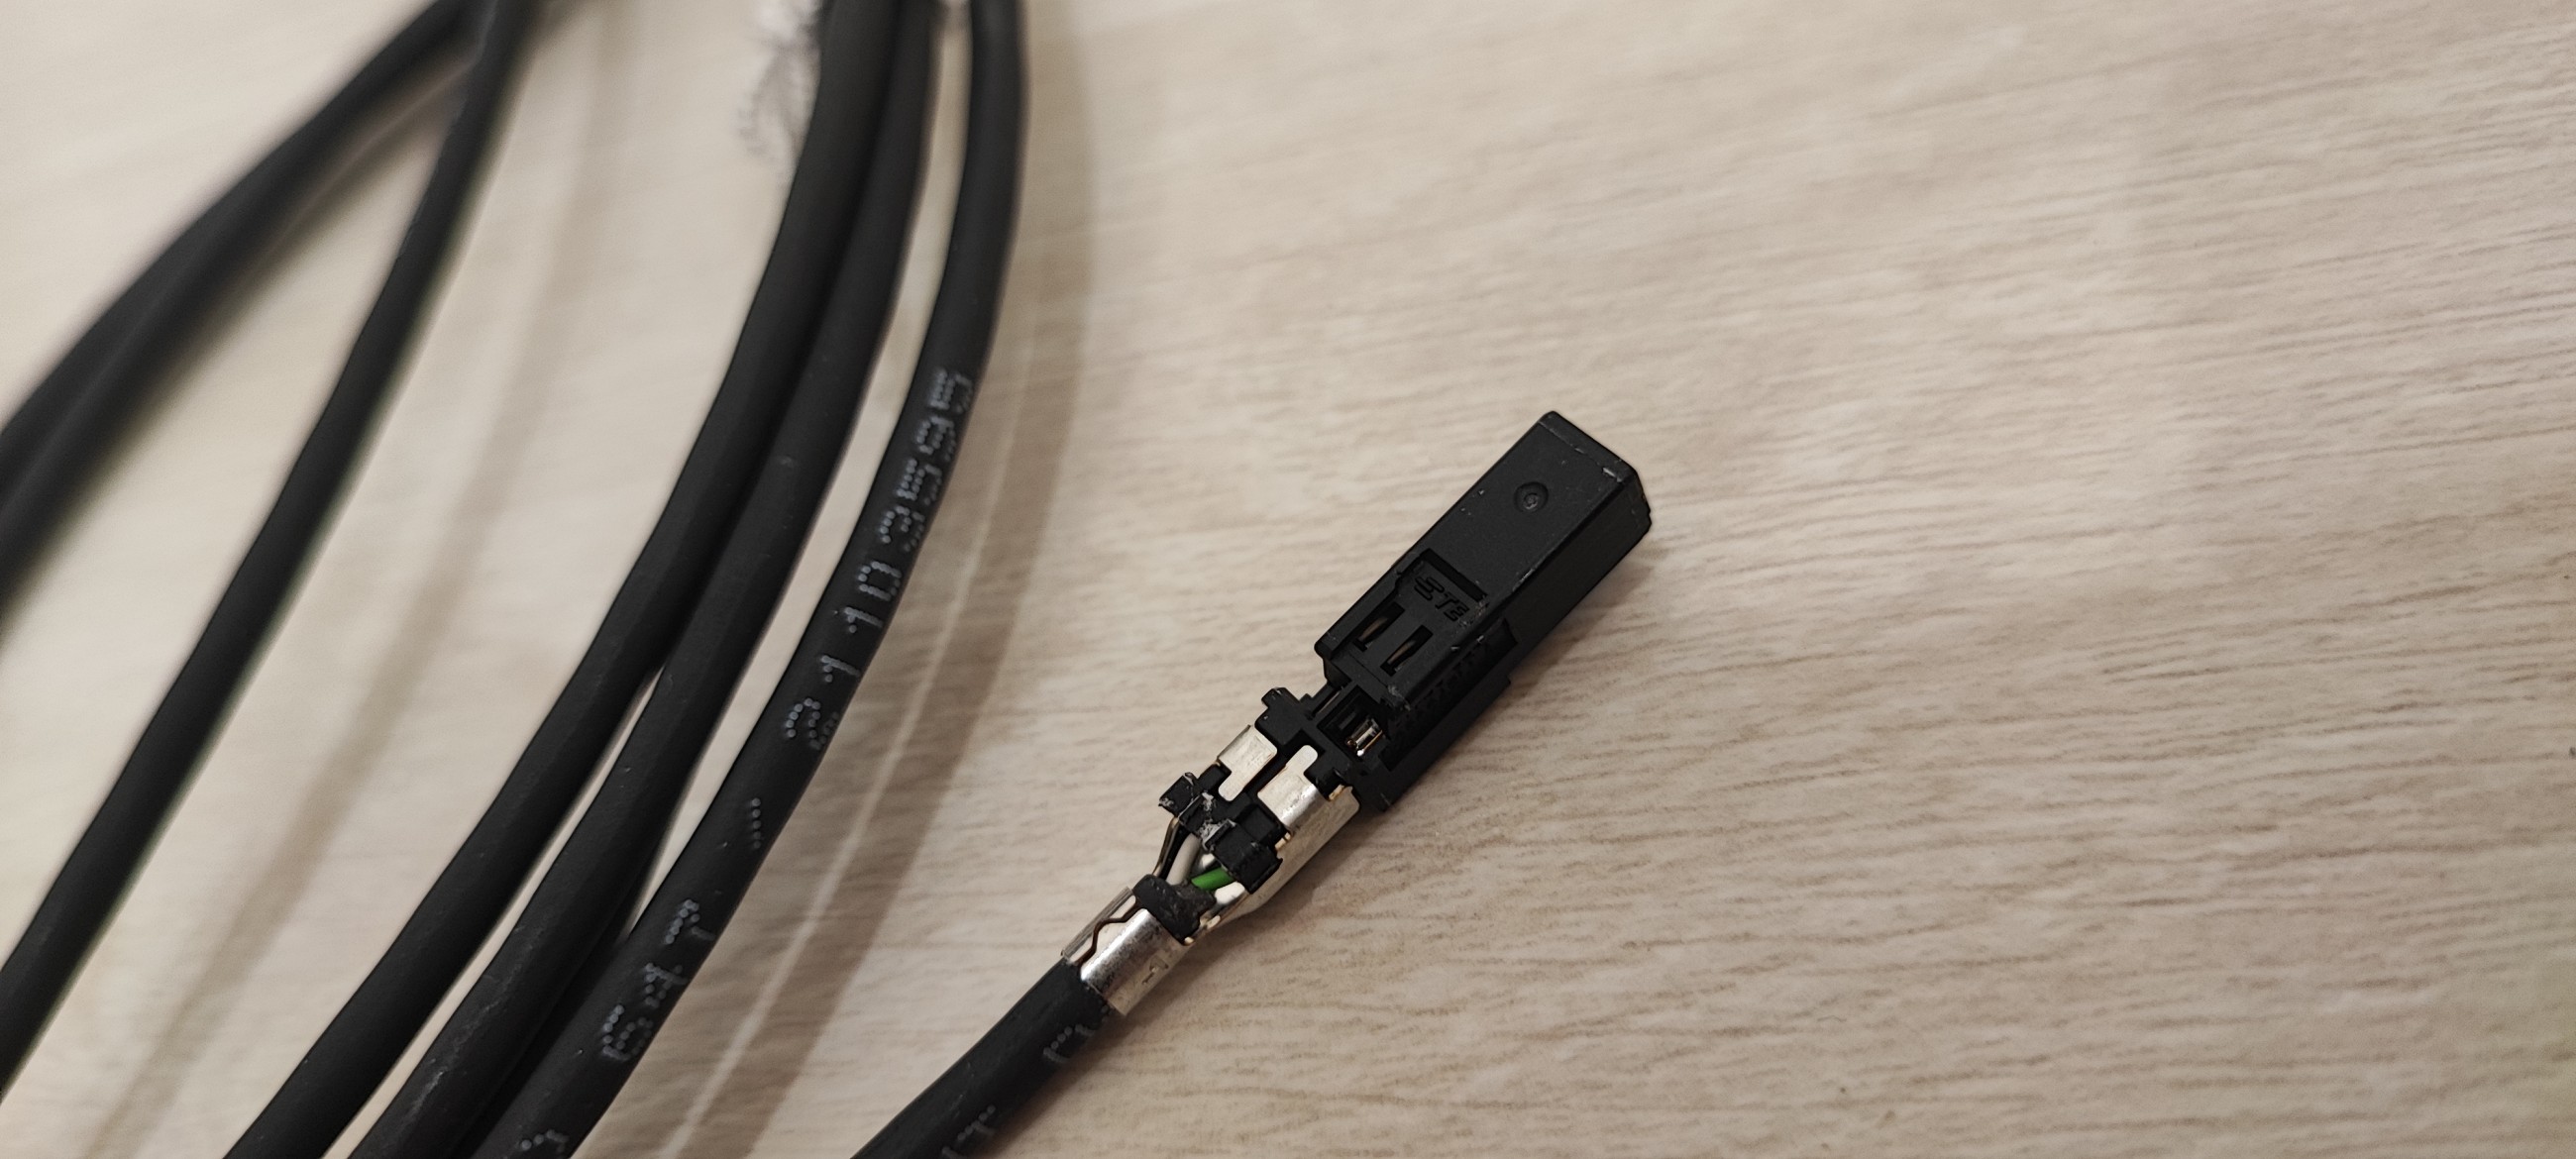 Ethernet cable W223 S-class Mercedes-Benz